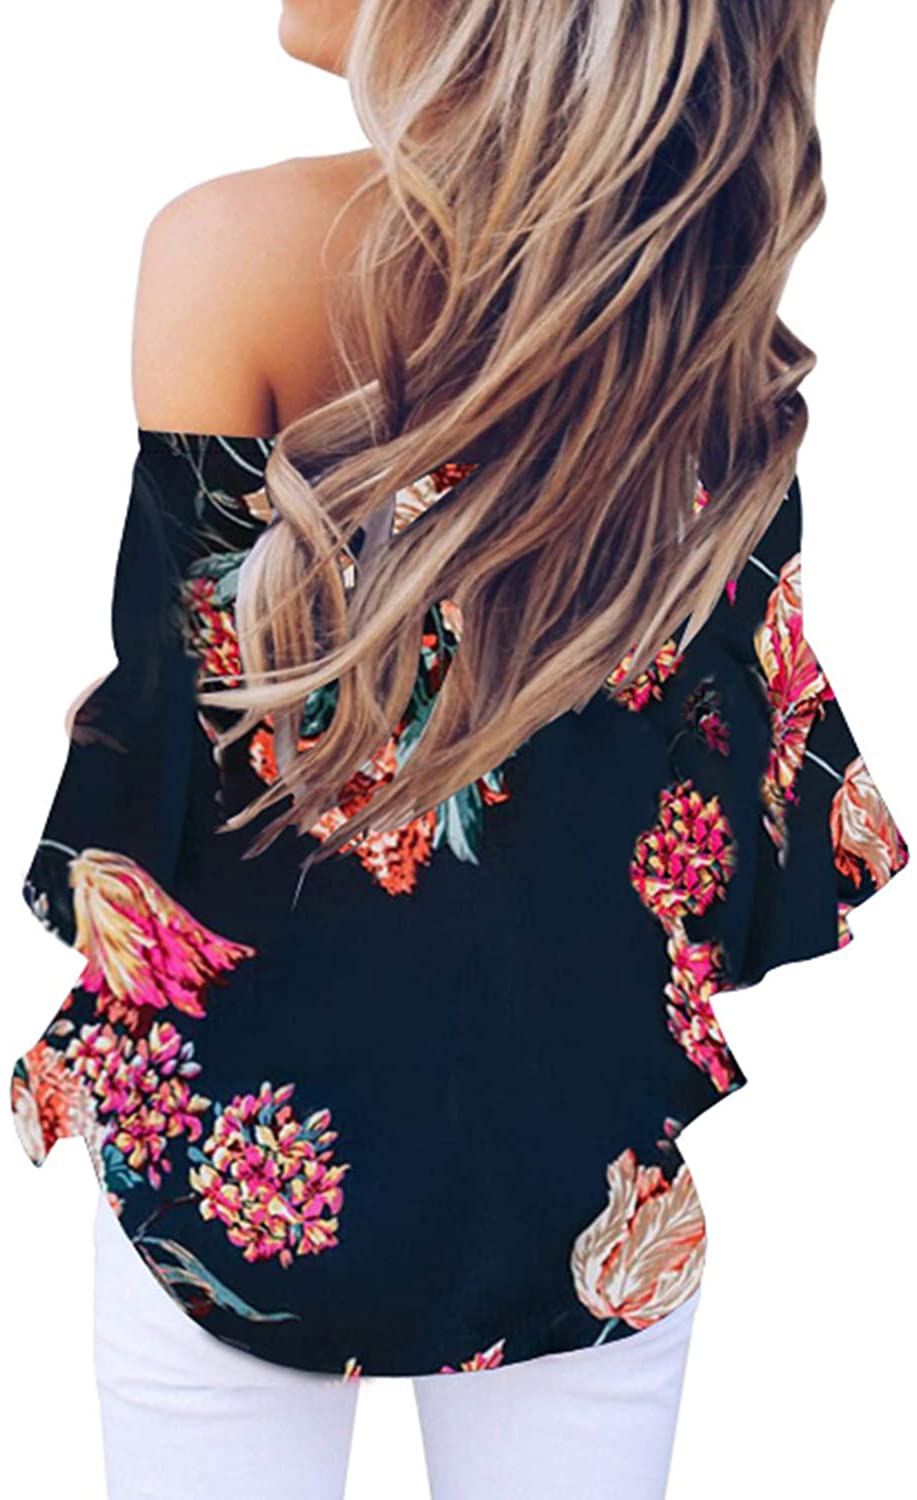 Asvivid Womens Summer Floral Printed Off The Shoulder Tops 3 4 Flare Sleeve Tie Knot T-Shirt Blouses 